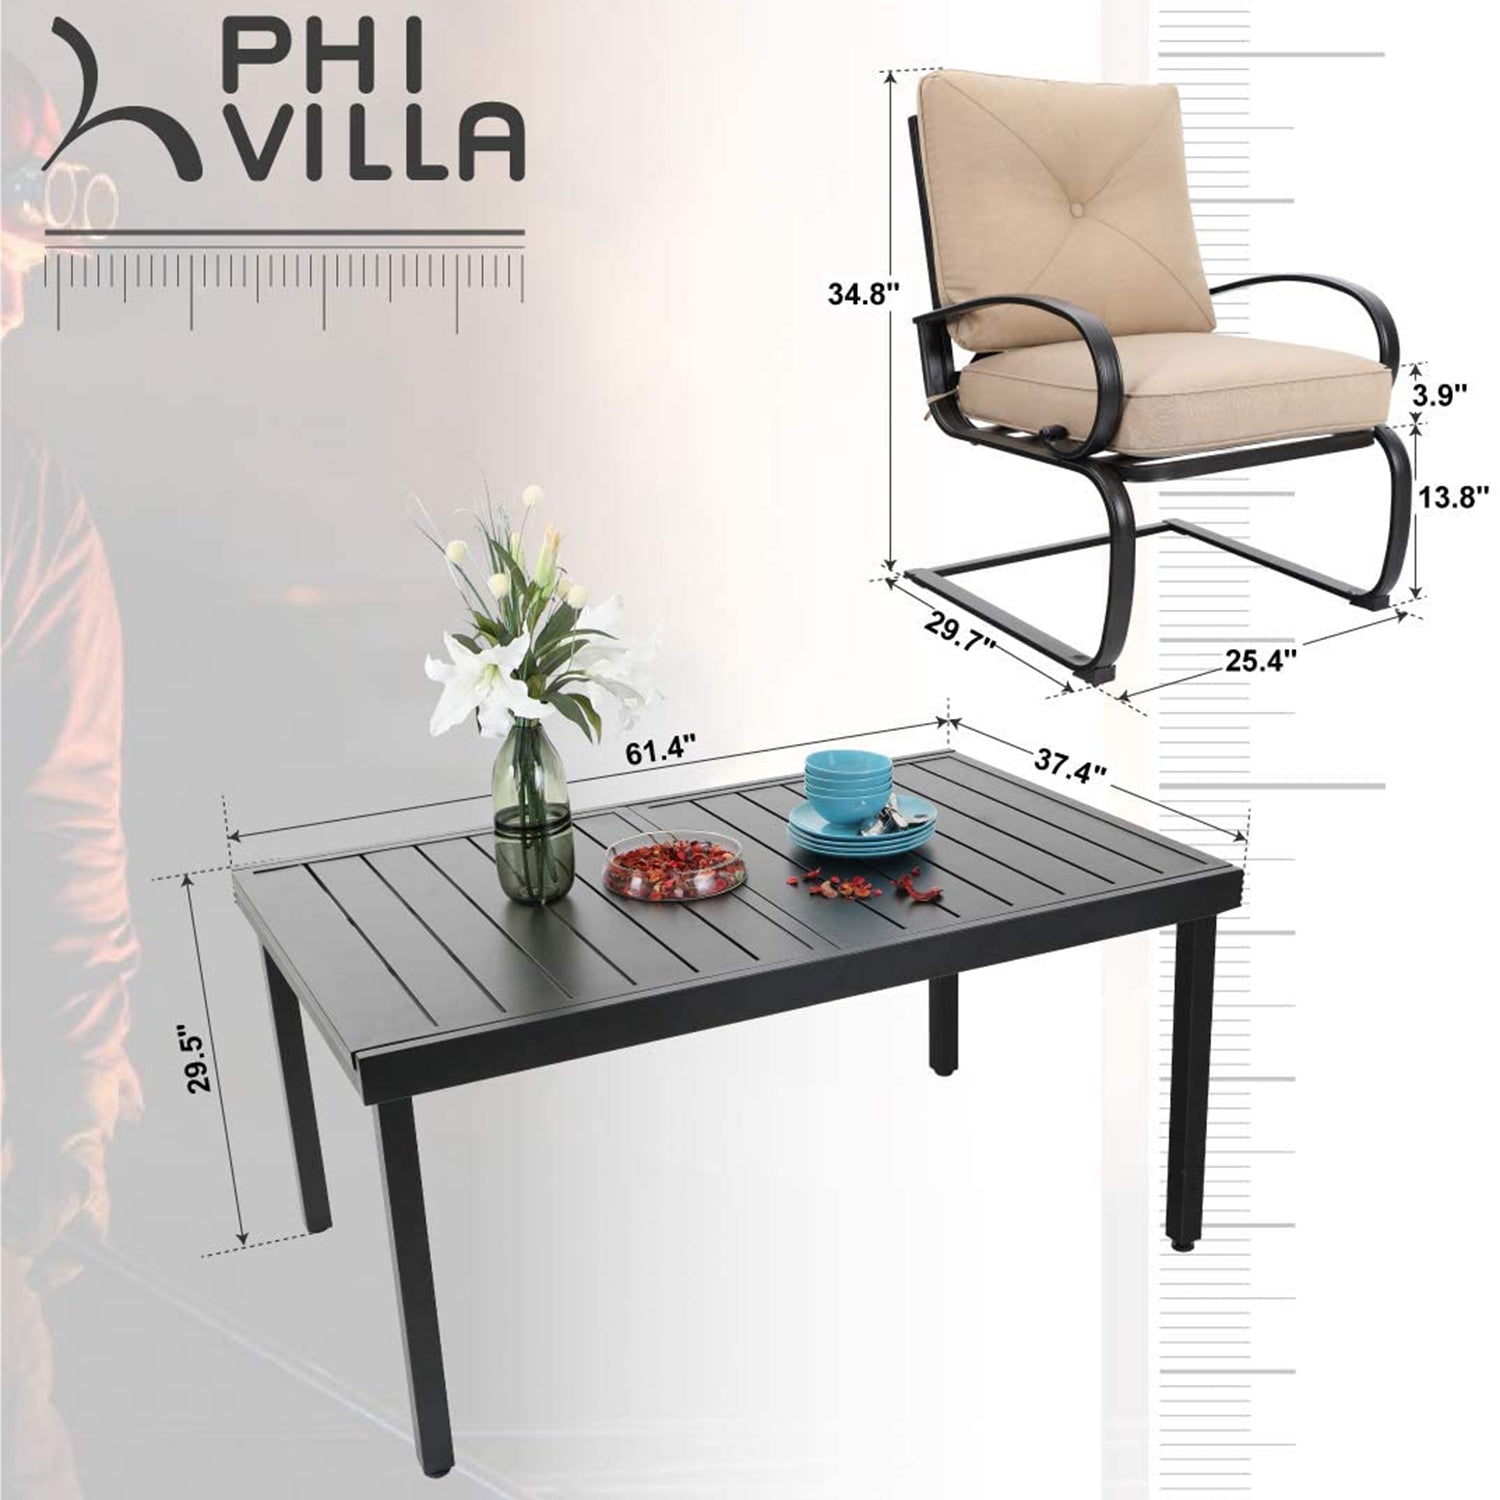 Sophia & William Outdoor Dining Set Extendable Steel Table & C-Spring Metal Cushioned Lounge Chairs